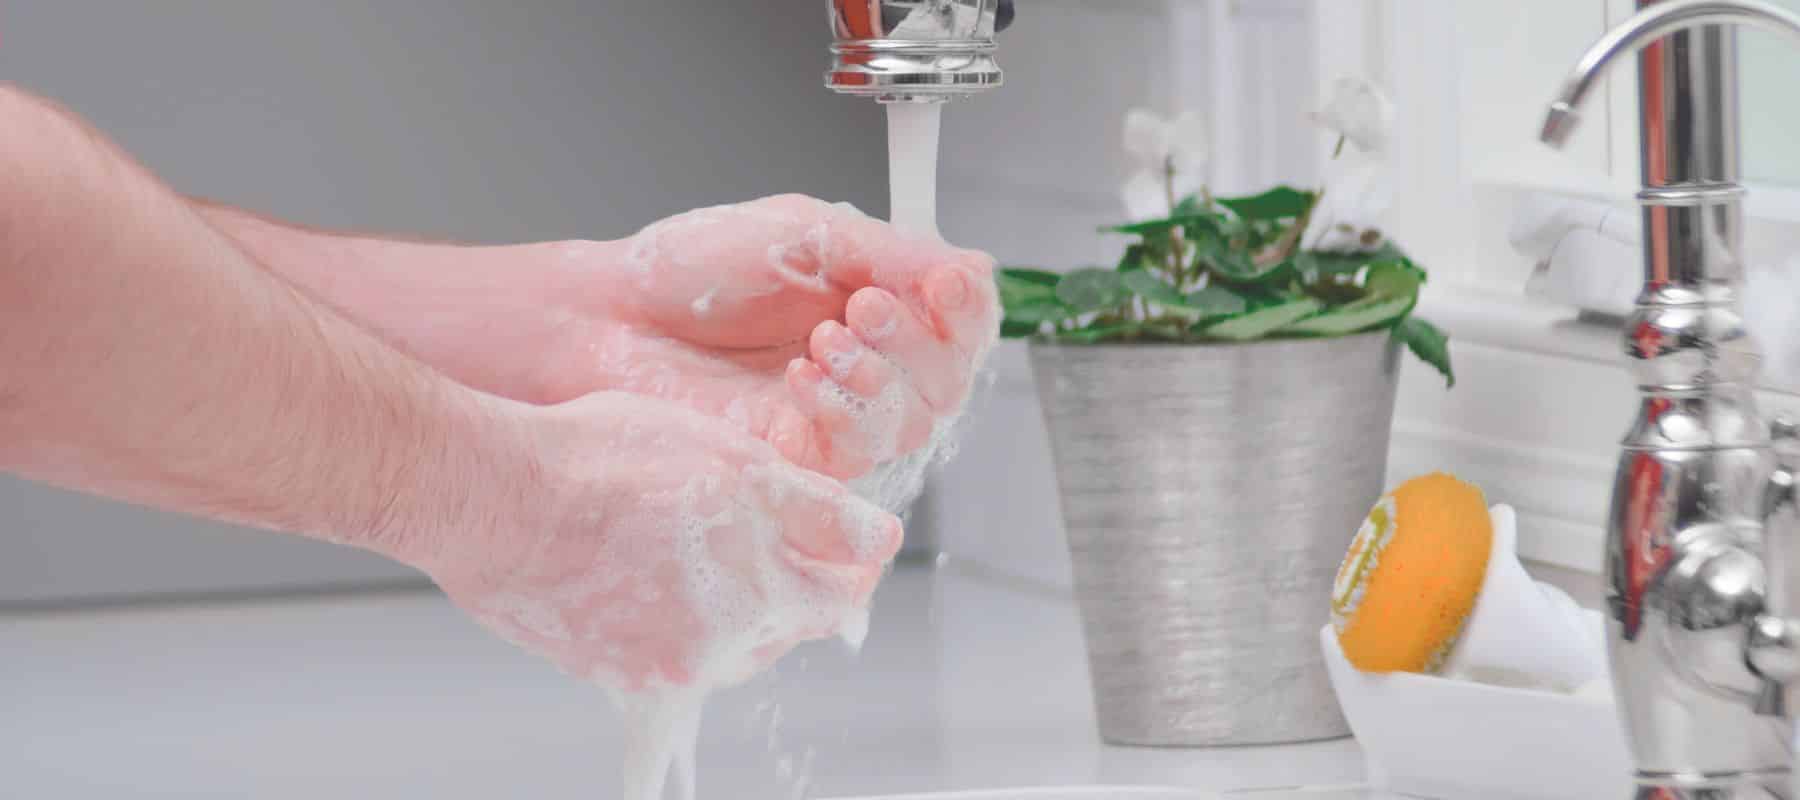 Person using soap and water to wash their hands